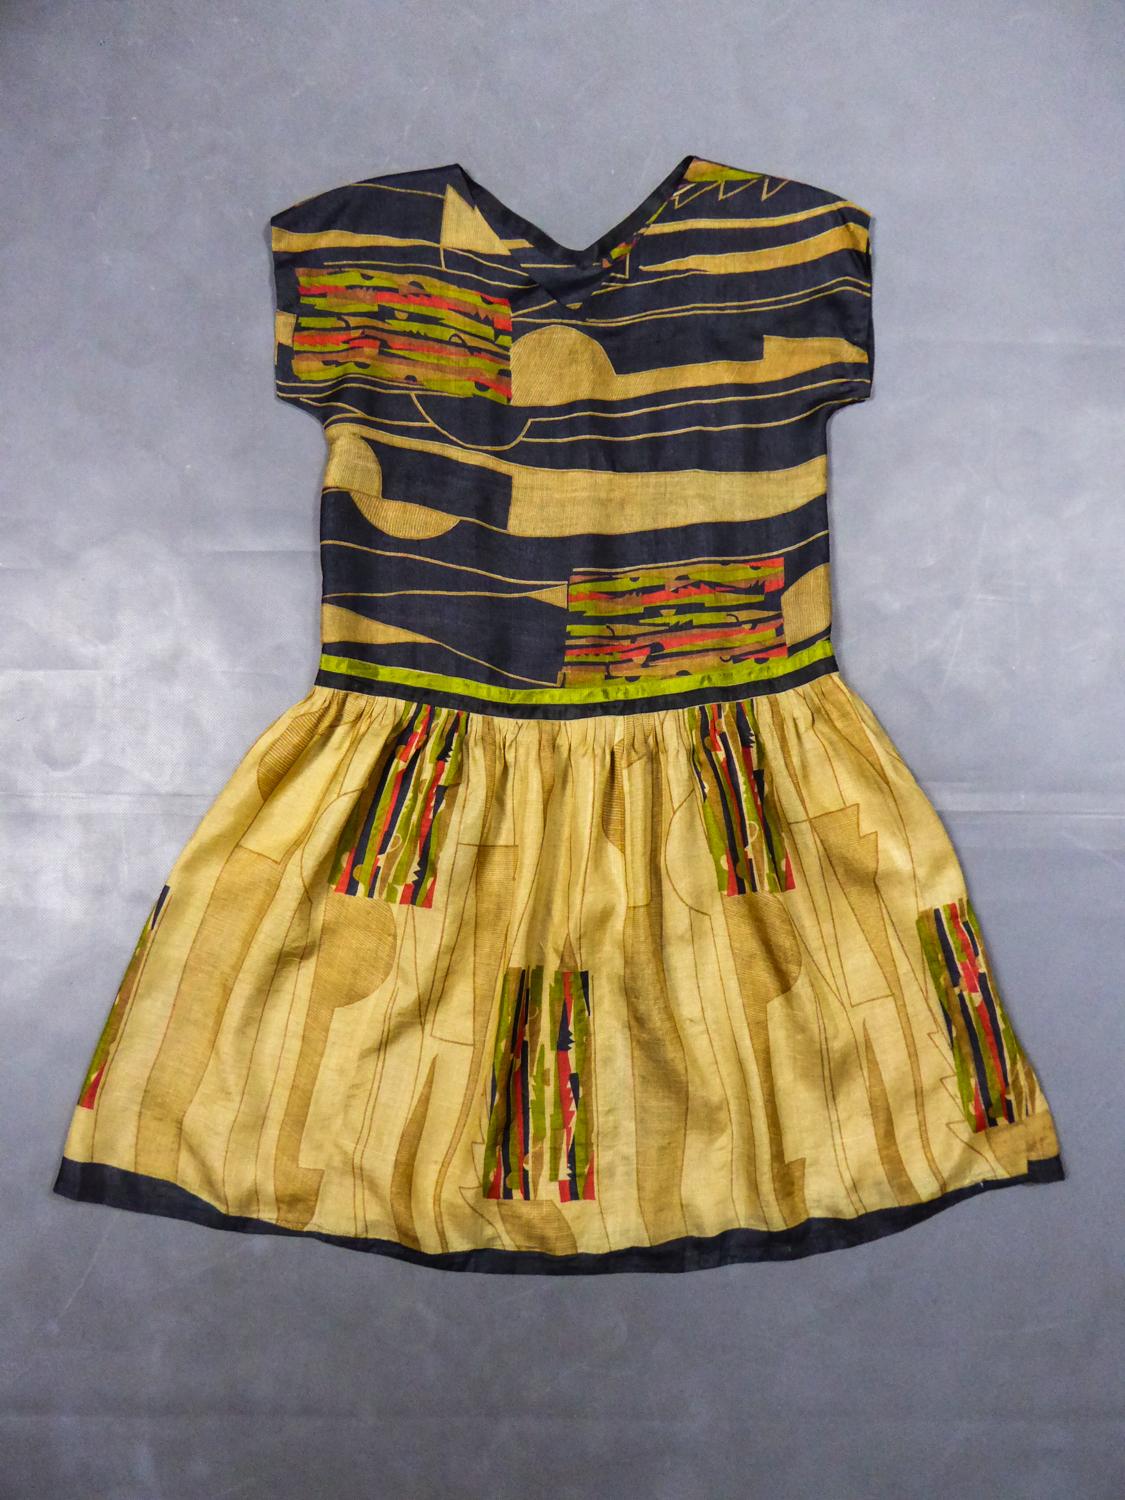 Circa 1915/1925
France or Europe

Rare Art Deco Dress in printed silk ponge with geometric and random patterns in shades of black, gold, green and red in the style of Sonia Delaunay and dating from 1915/1925 years. Dress with small sleeves and